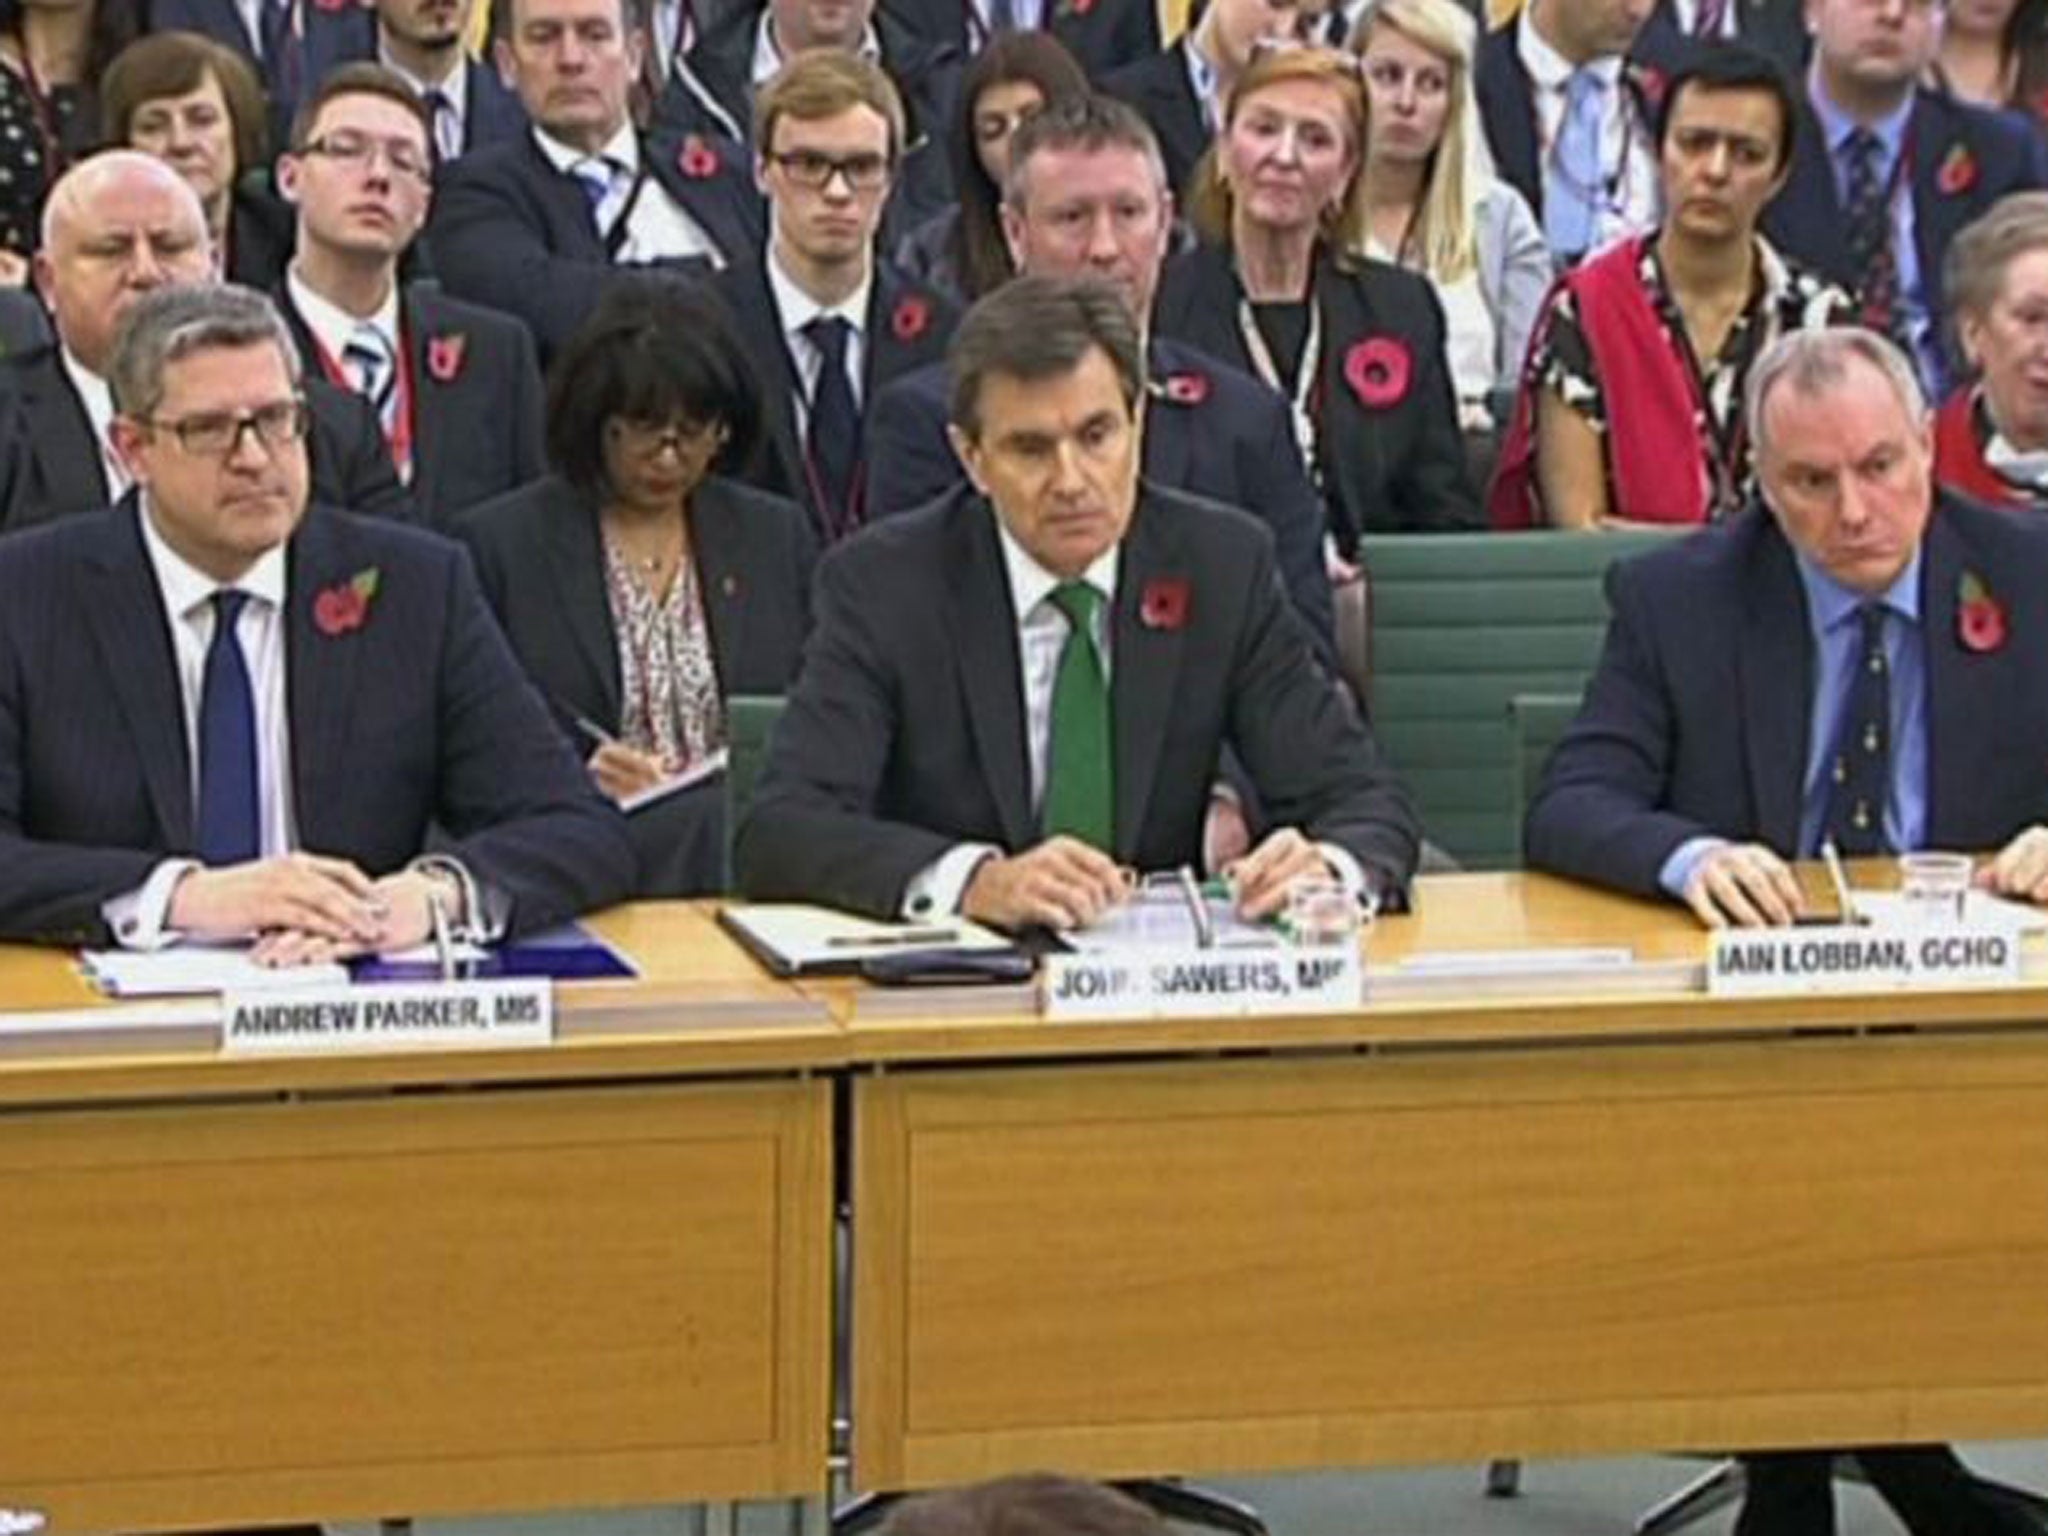 From left, Andrew Parker head of Britain's domestic security agency MI5, John Sawers head of Britain's foreign spy service MI6 and Iain Lobban director of electronic surveillance agency GCHQ, as they take questions from Parliament's Intelligence and Security Committee, questioned on the work of their agencies, their current priorities and threats to the UK